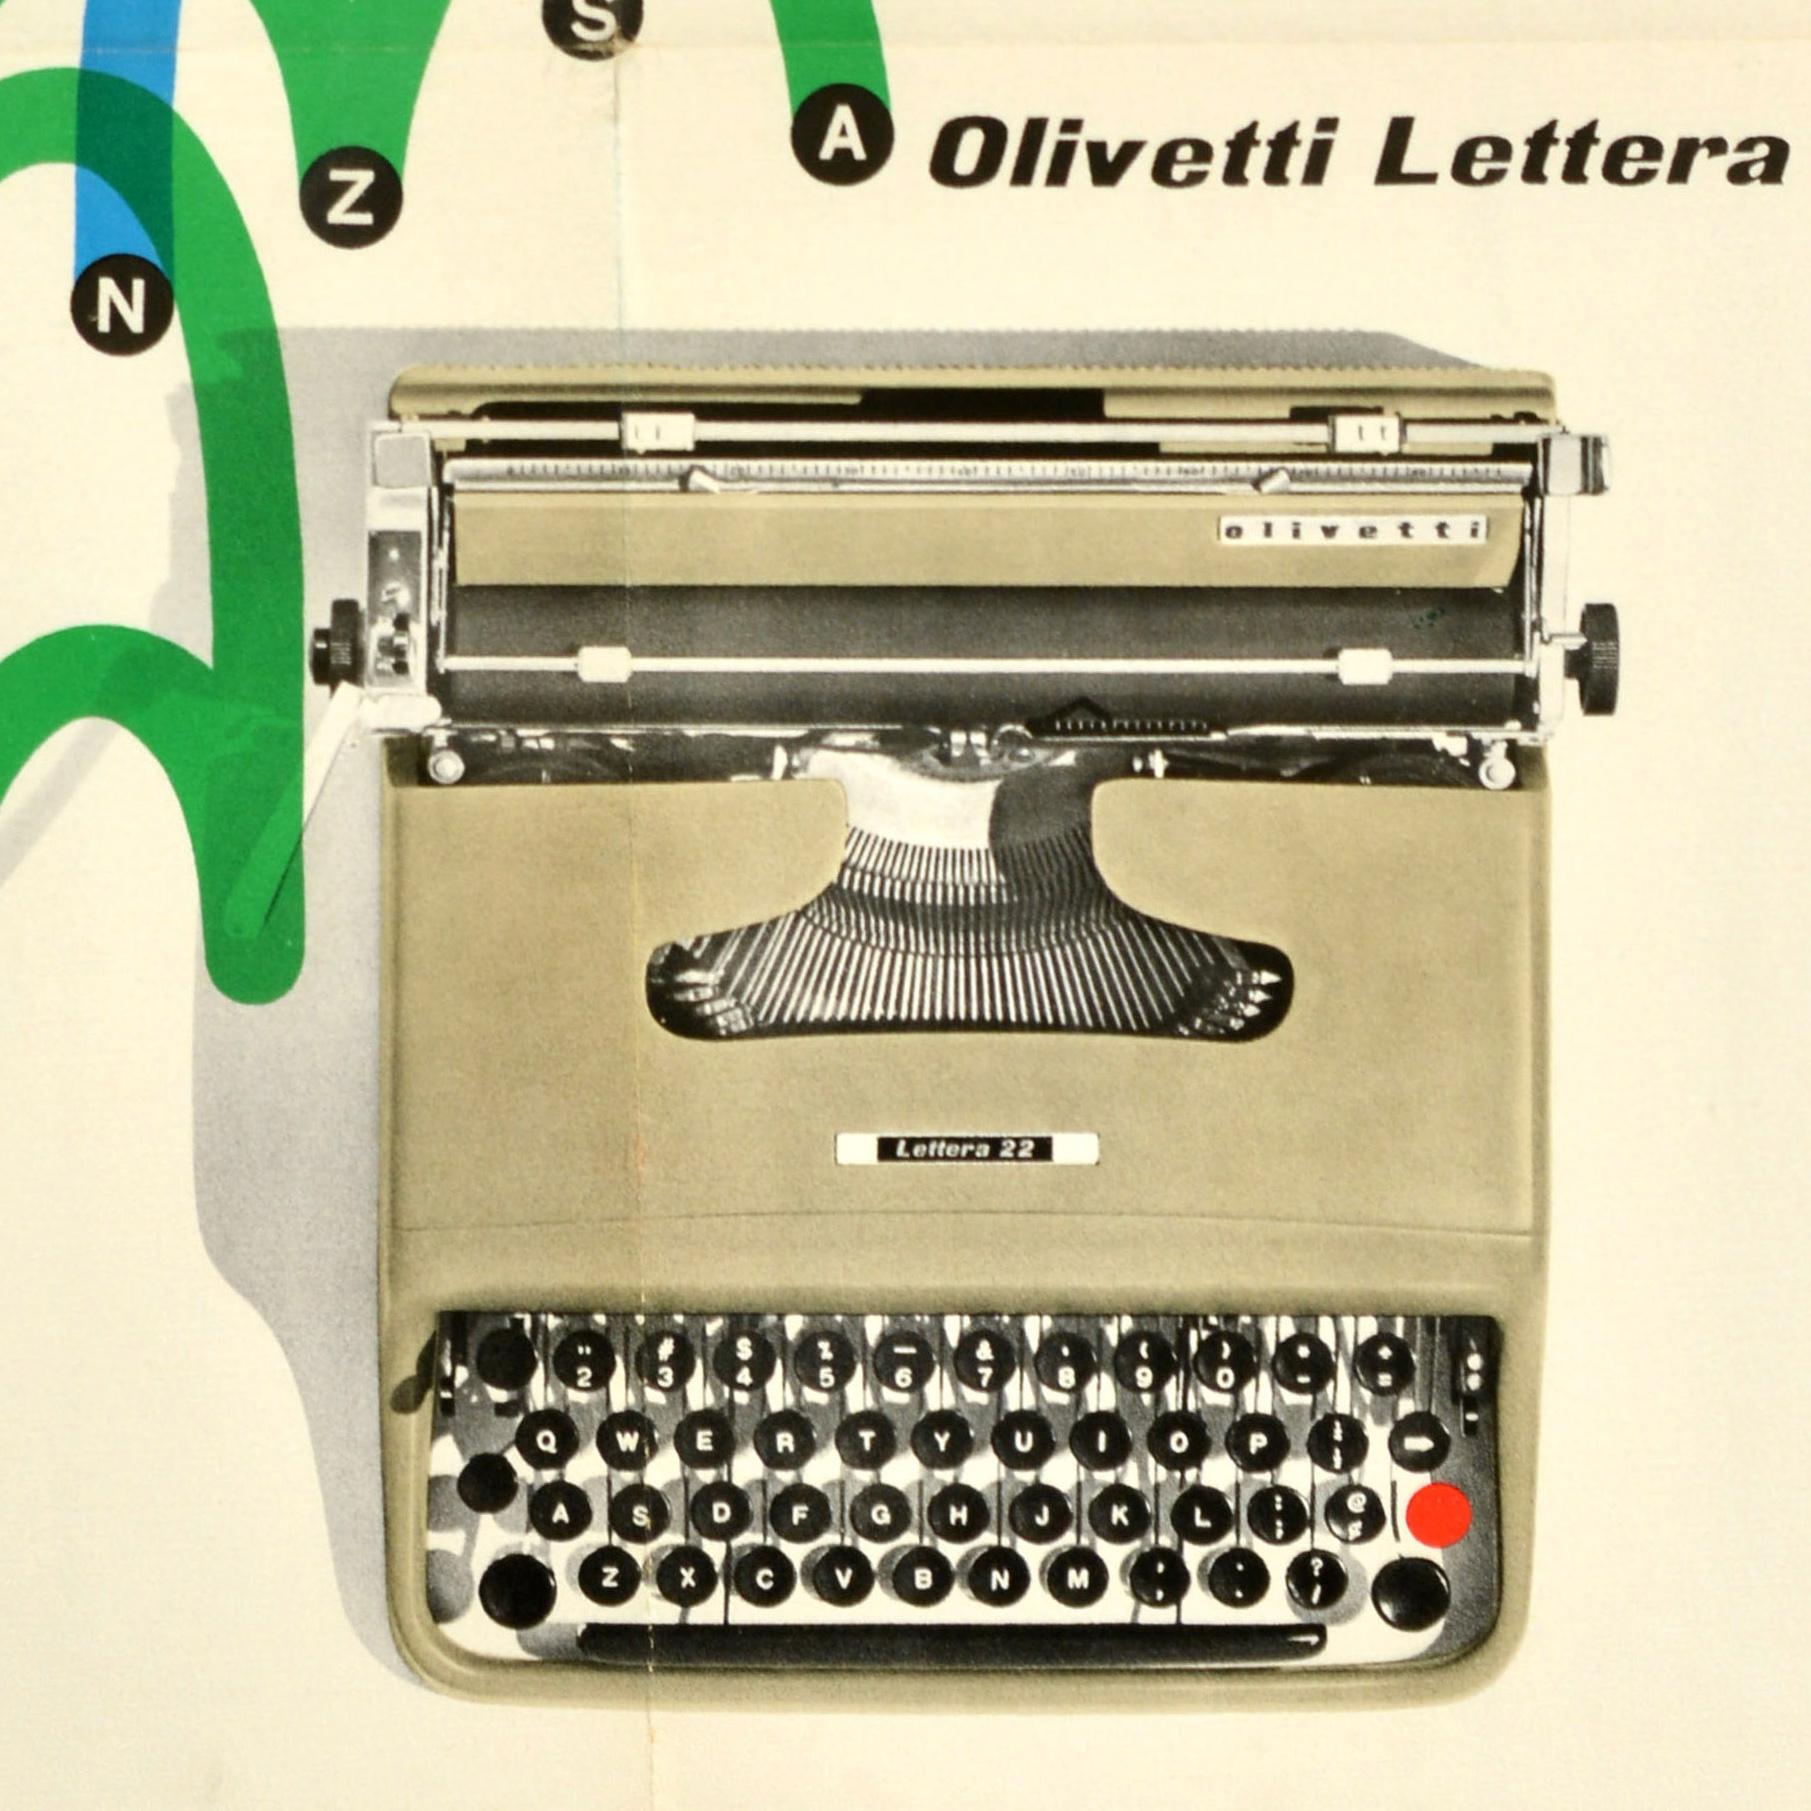 Original vintage advertising poster for the Olivetti Lettera 22 typewriter model featuring a great mid-century graphic design depicting colourful curved arches in blue, yellow, red and green connecting type letters of the alphabet above a photograph